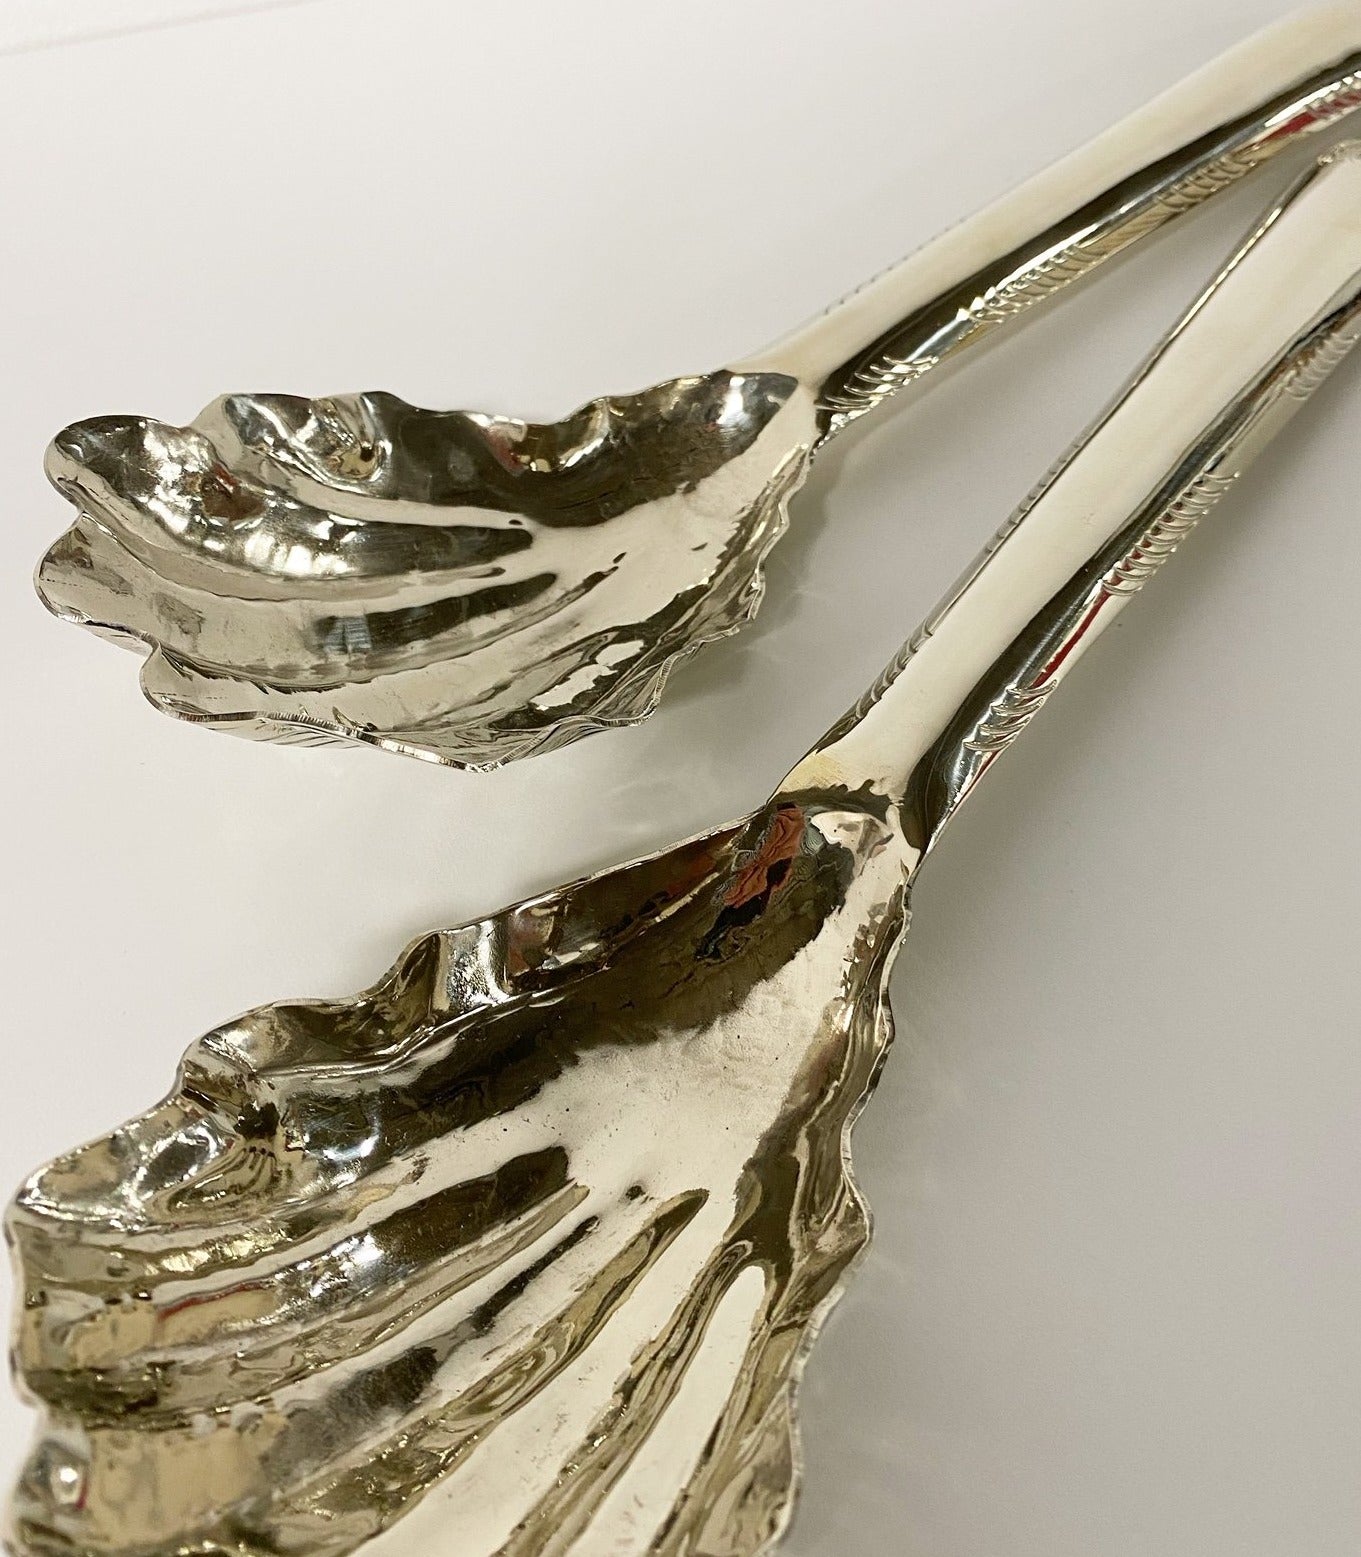 Oyster Shell Serving Set